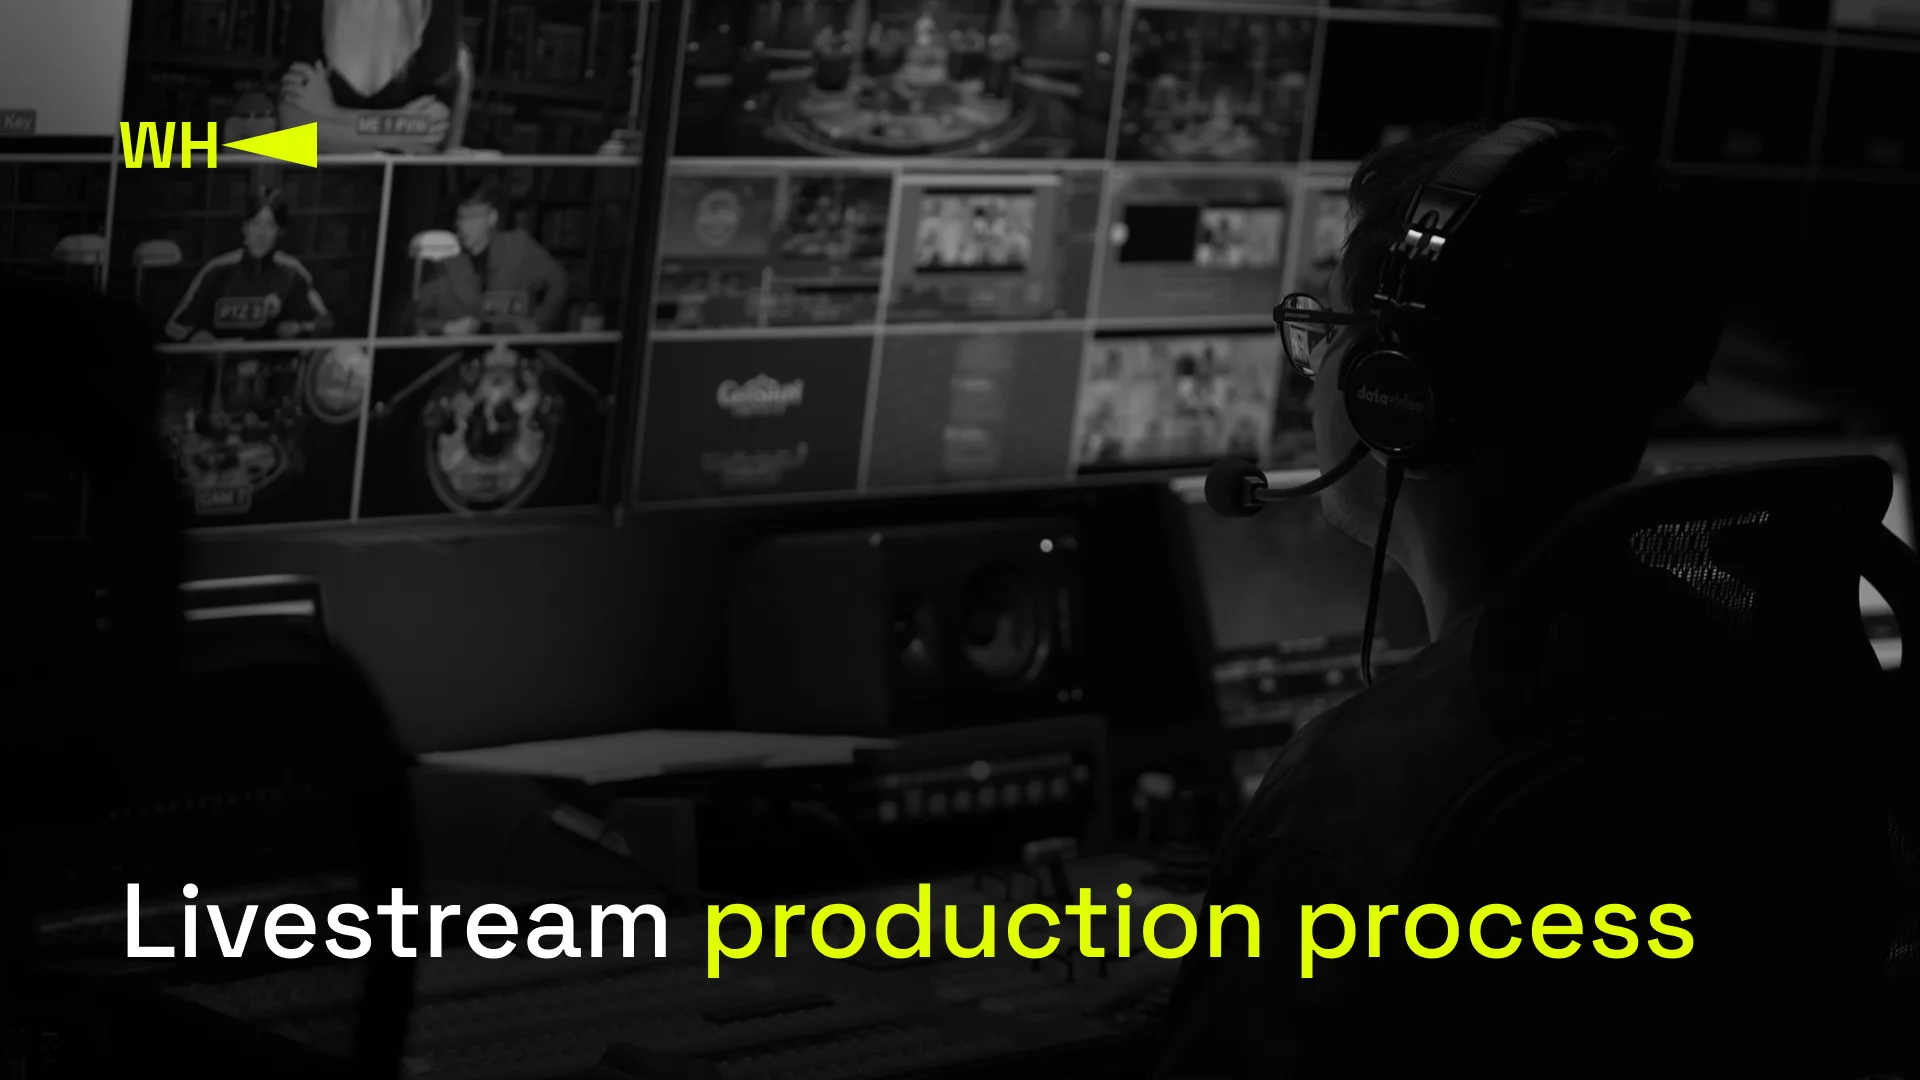 Livestream production process. Credit: WePlay Holding